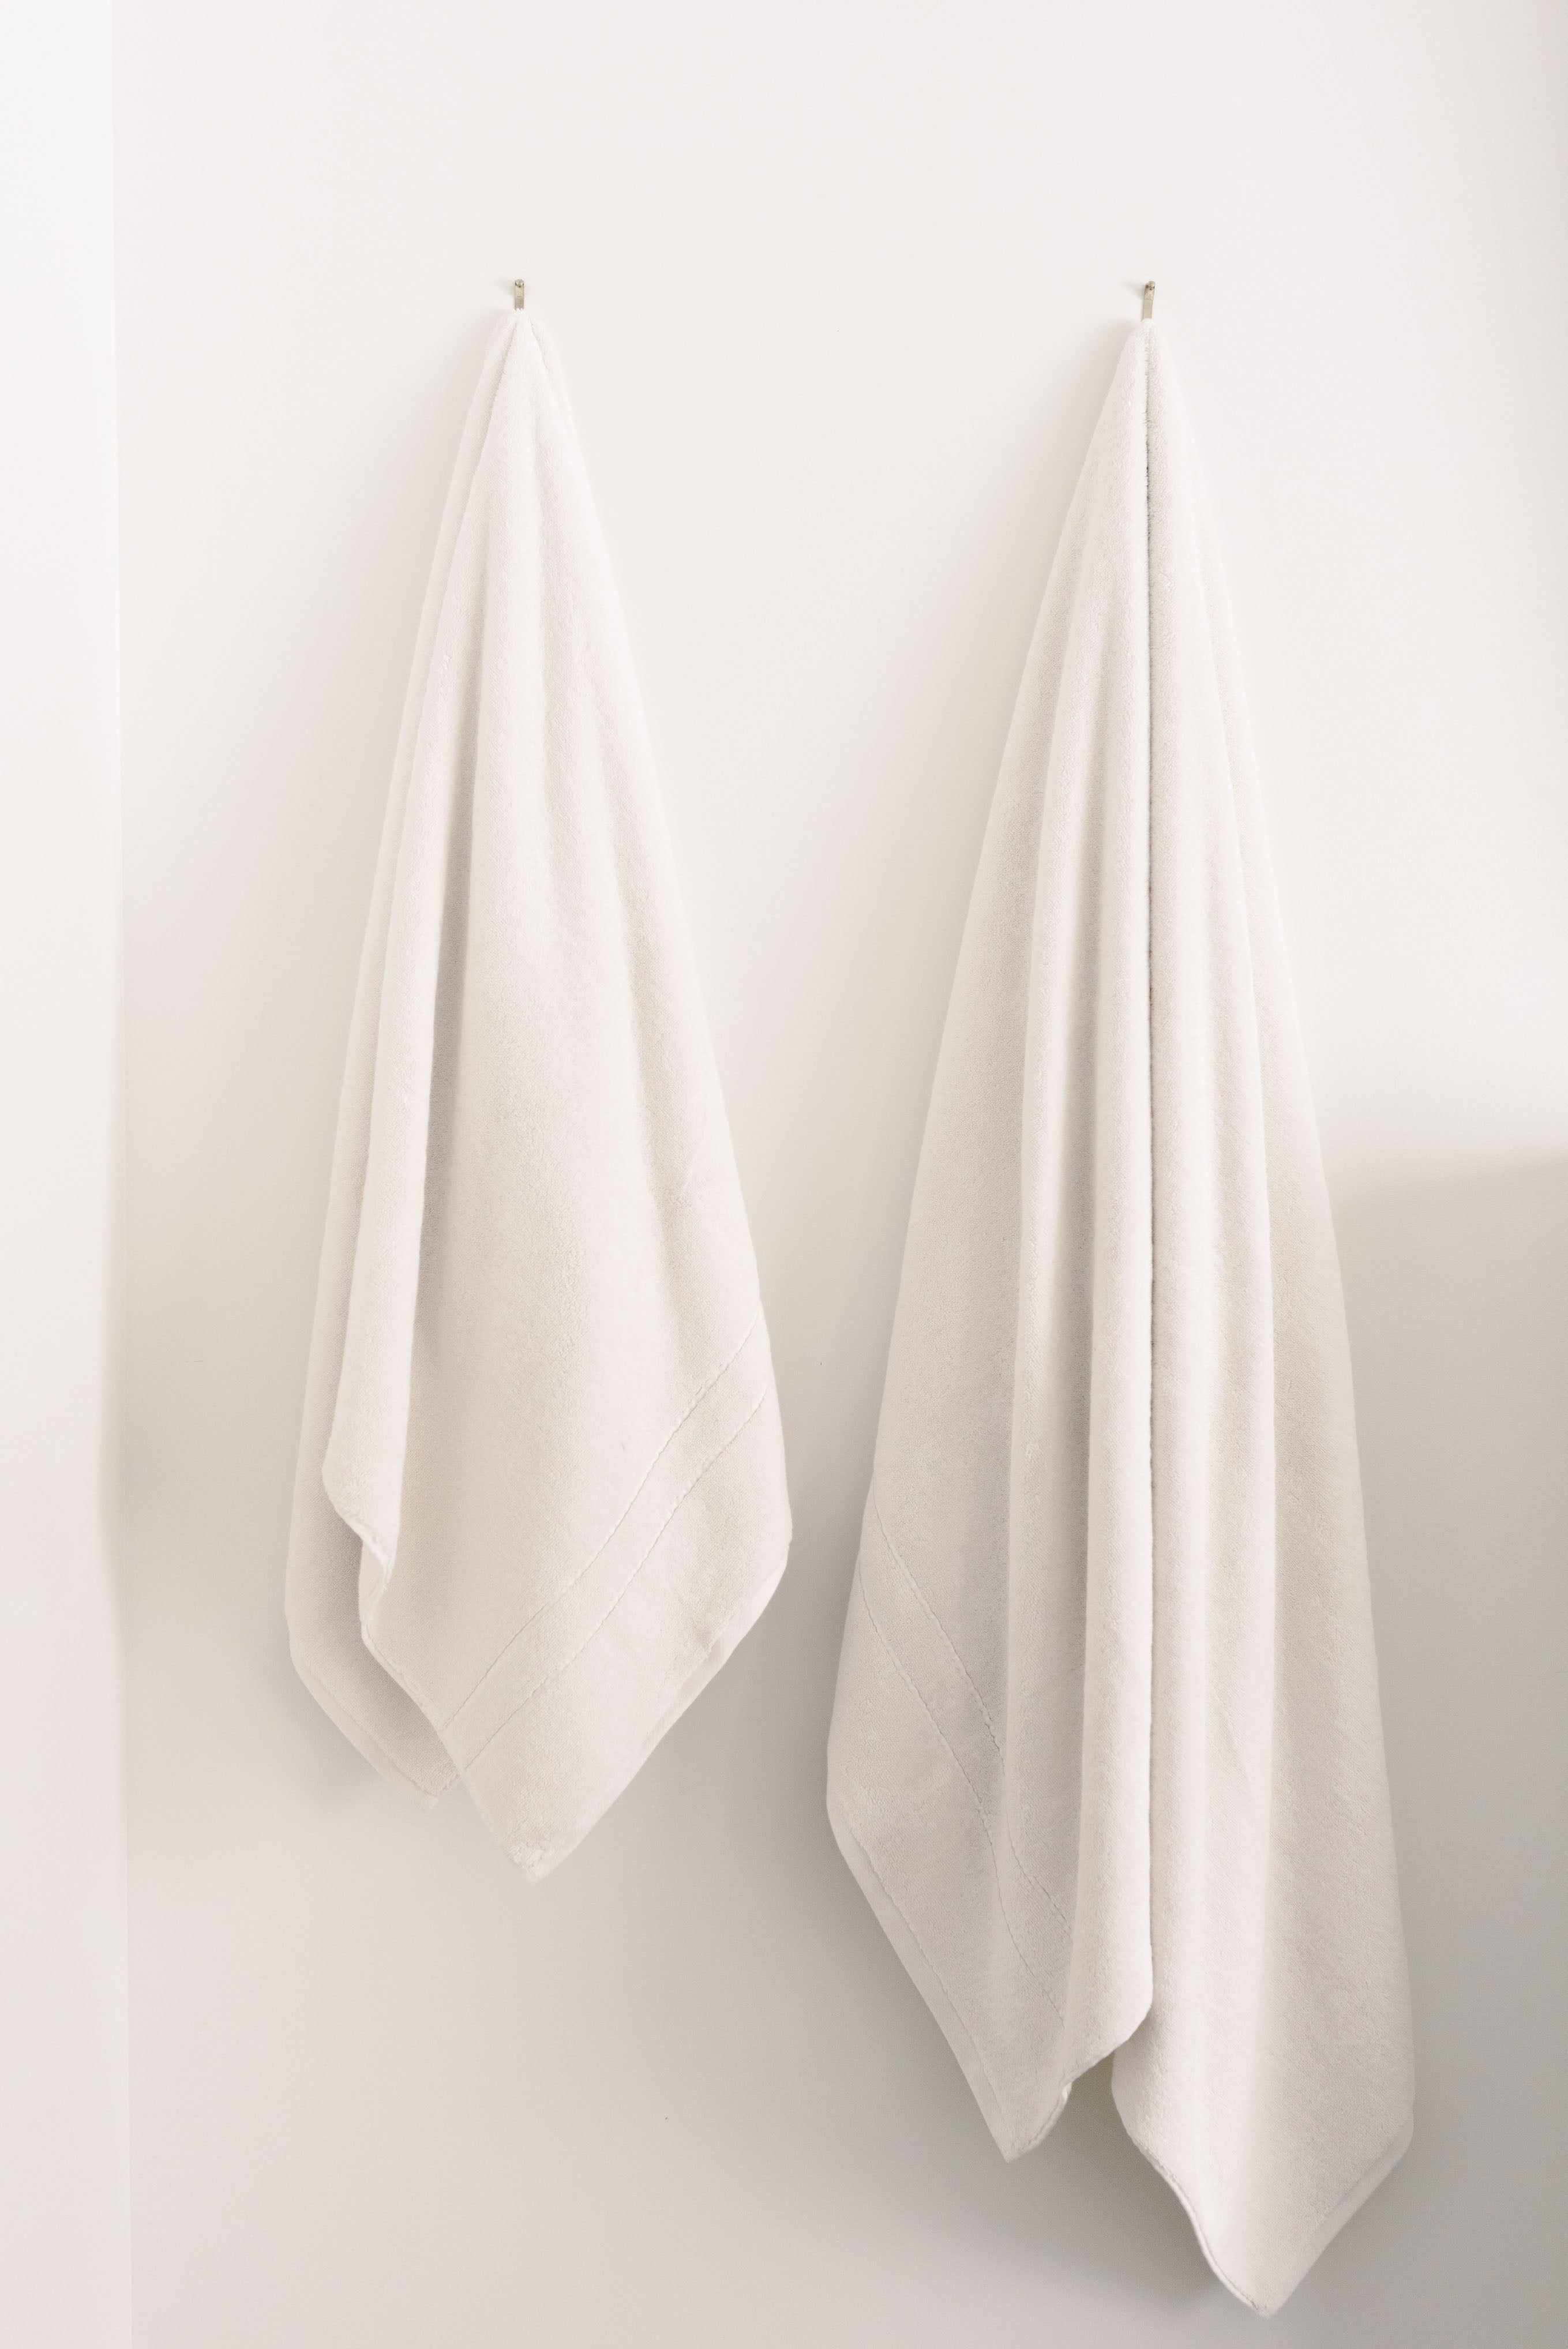 Premium Plush Bath Towels/sheets in the color seashell. Photo of Premium Plush Bath Towels taken in a bathroom showing the towels which are hung from a towel rack. |Color:Seashell